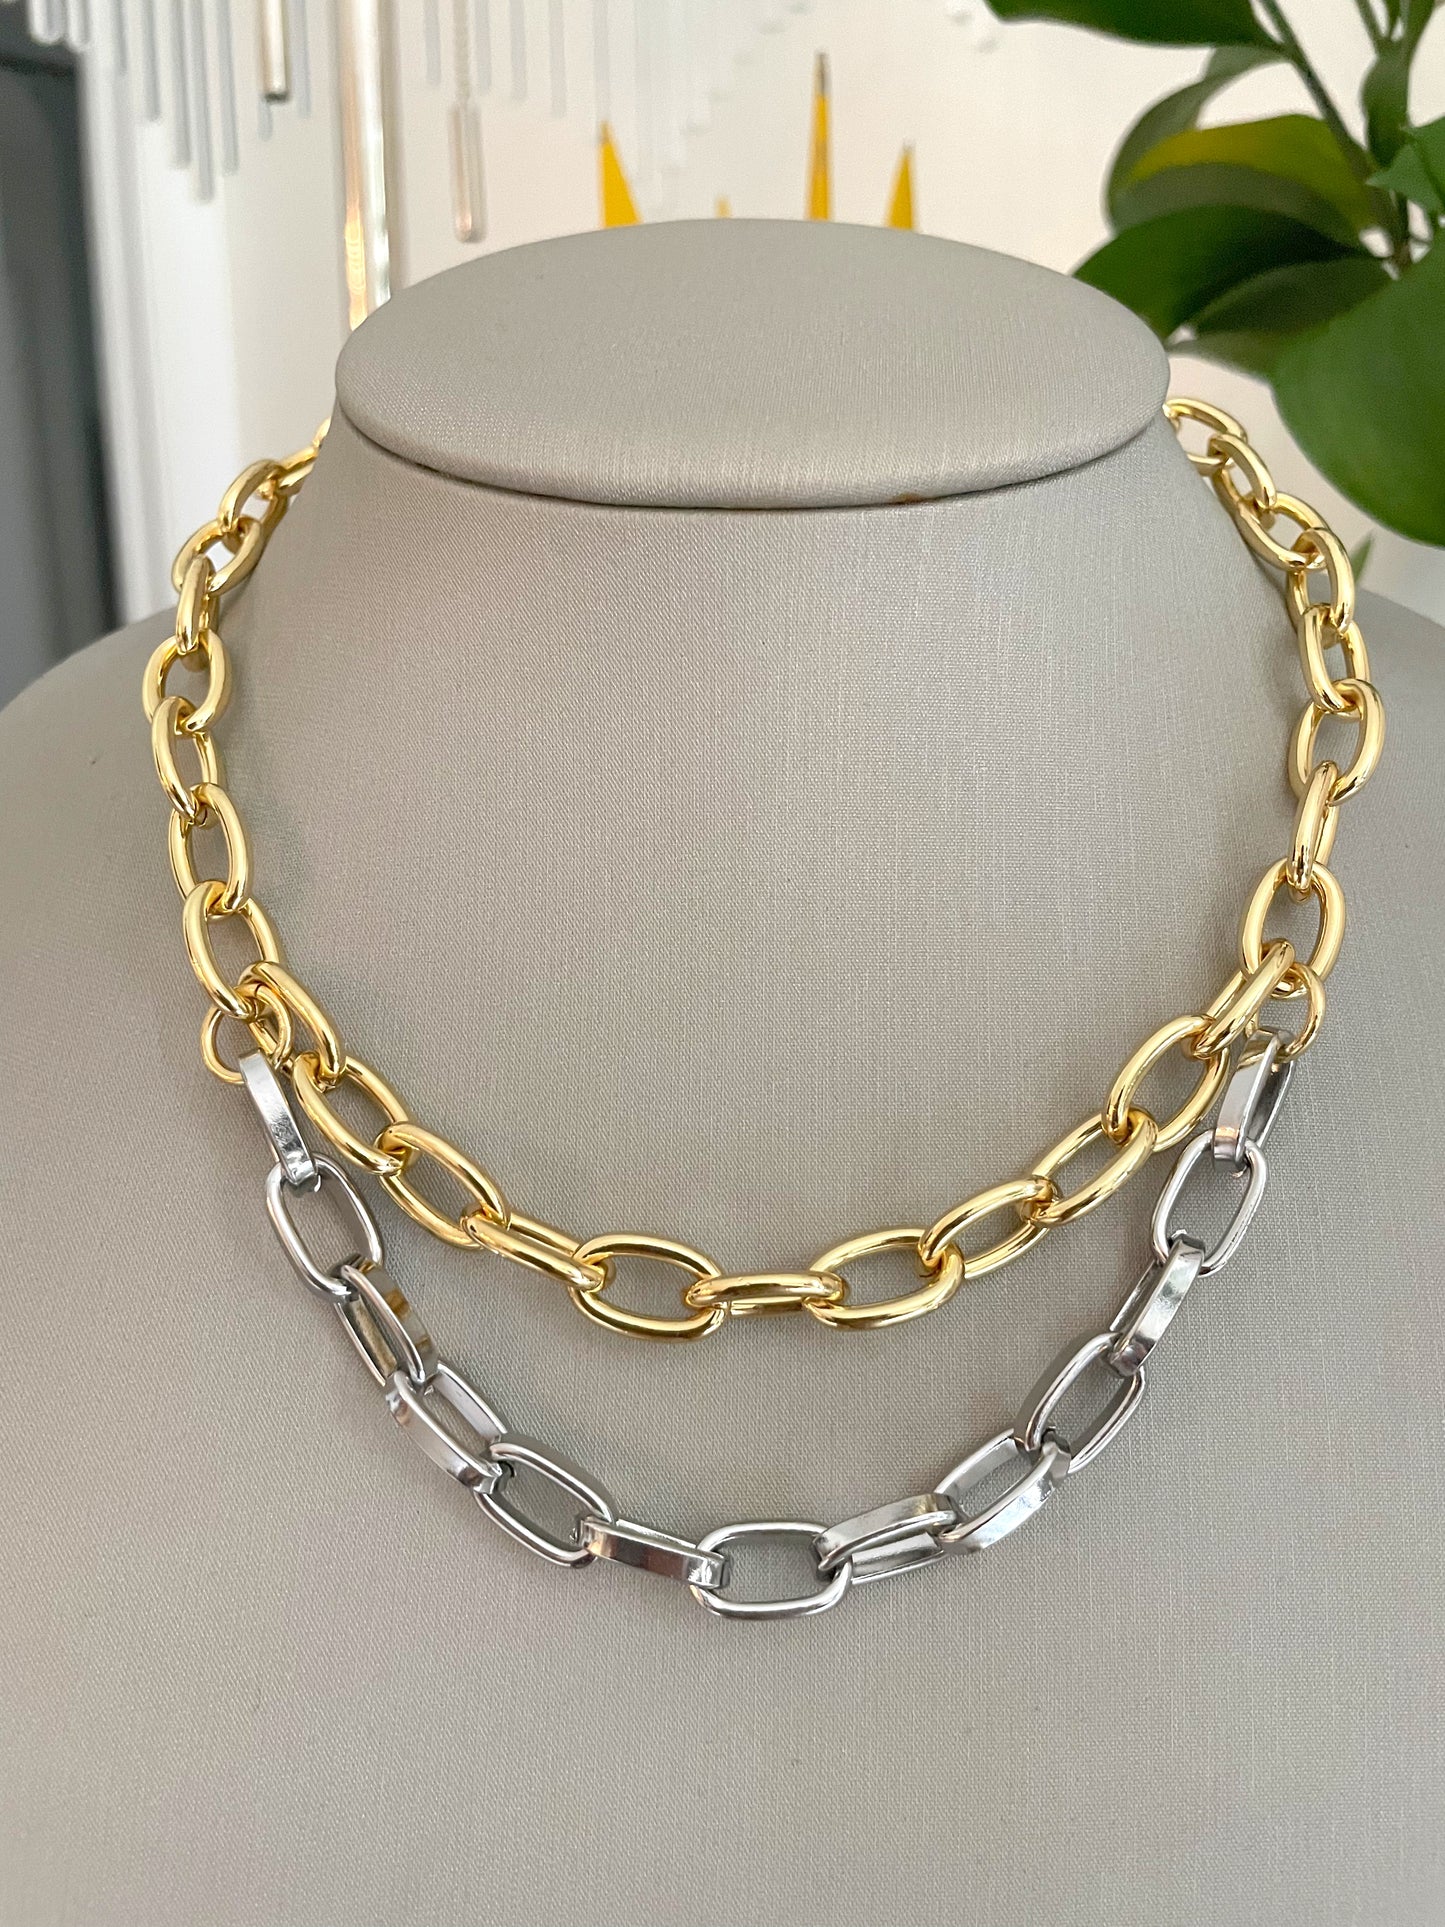 Gold / Silver layered necklace